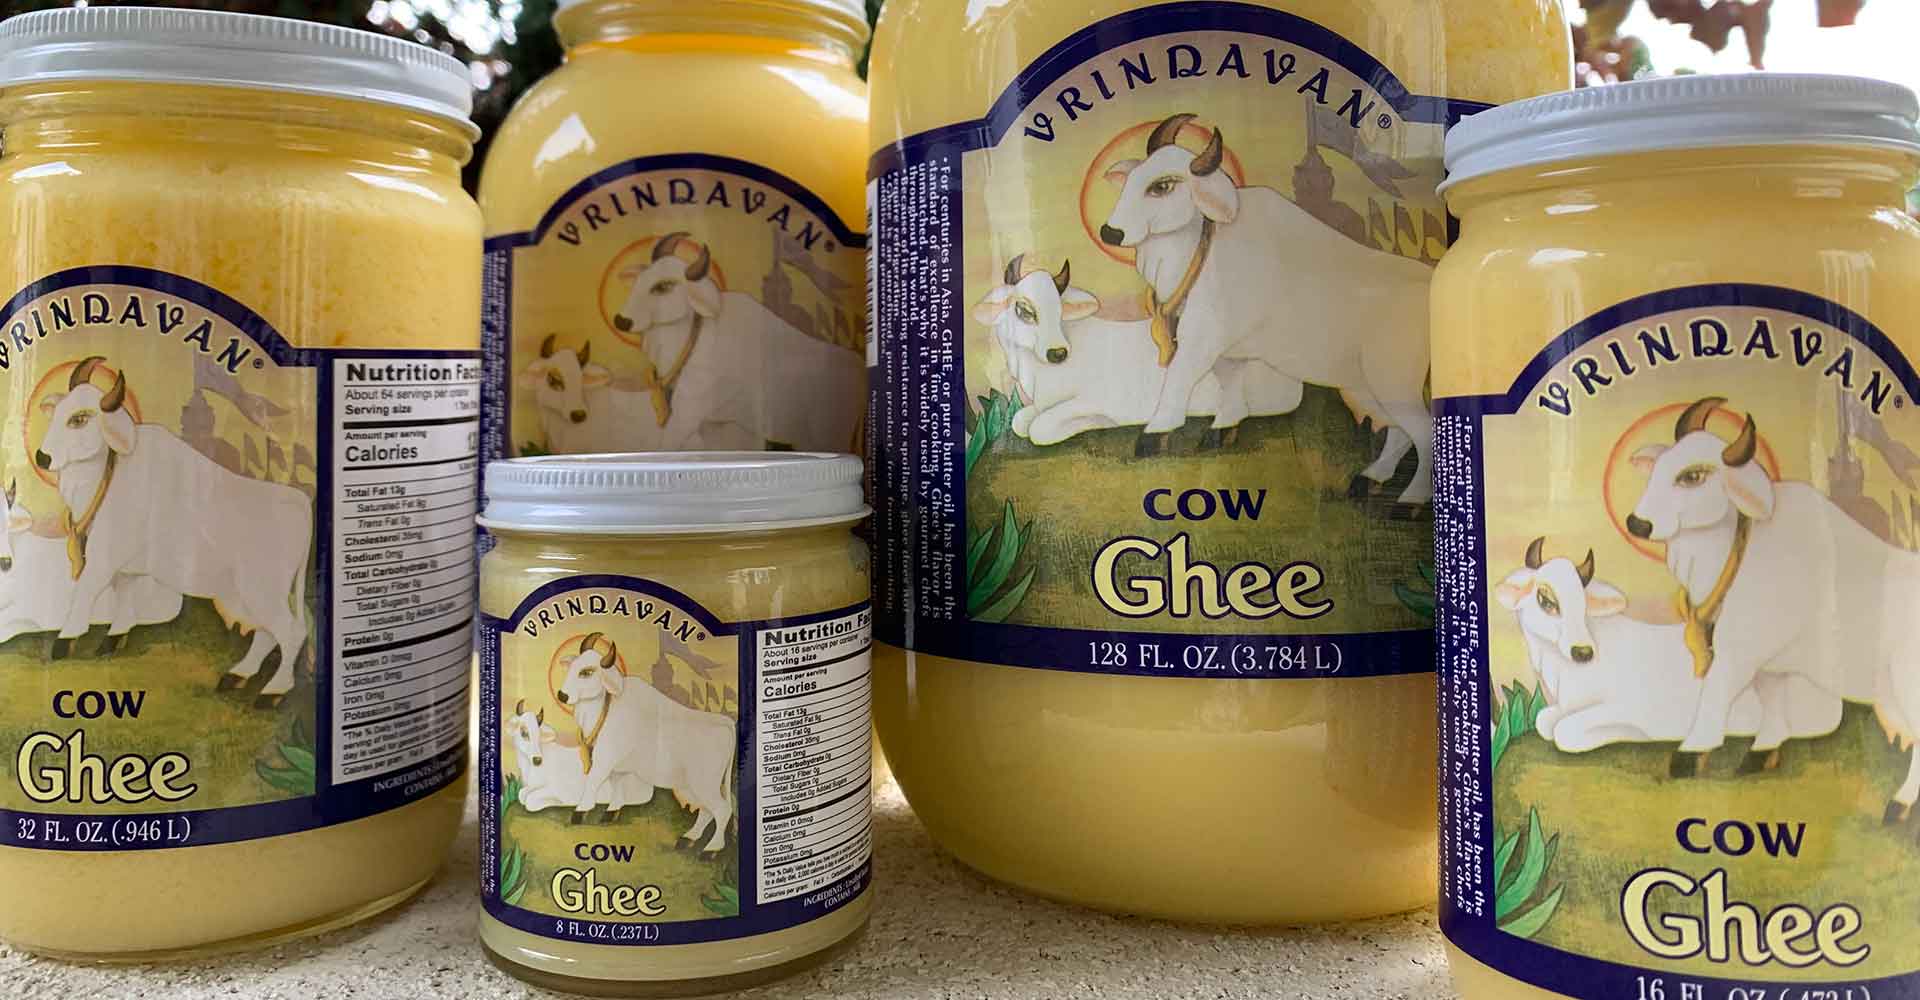 Why Cow Ghee?